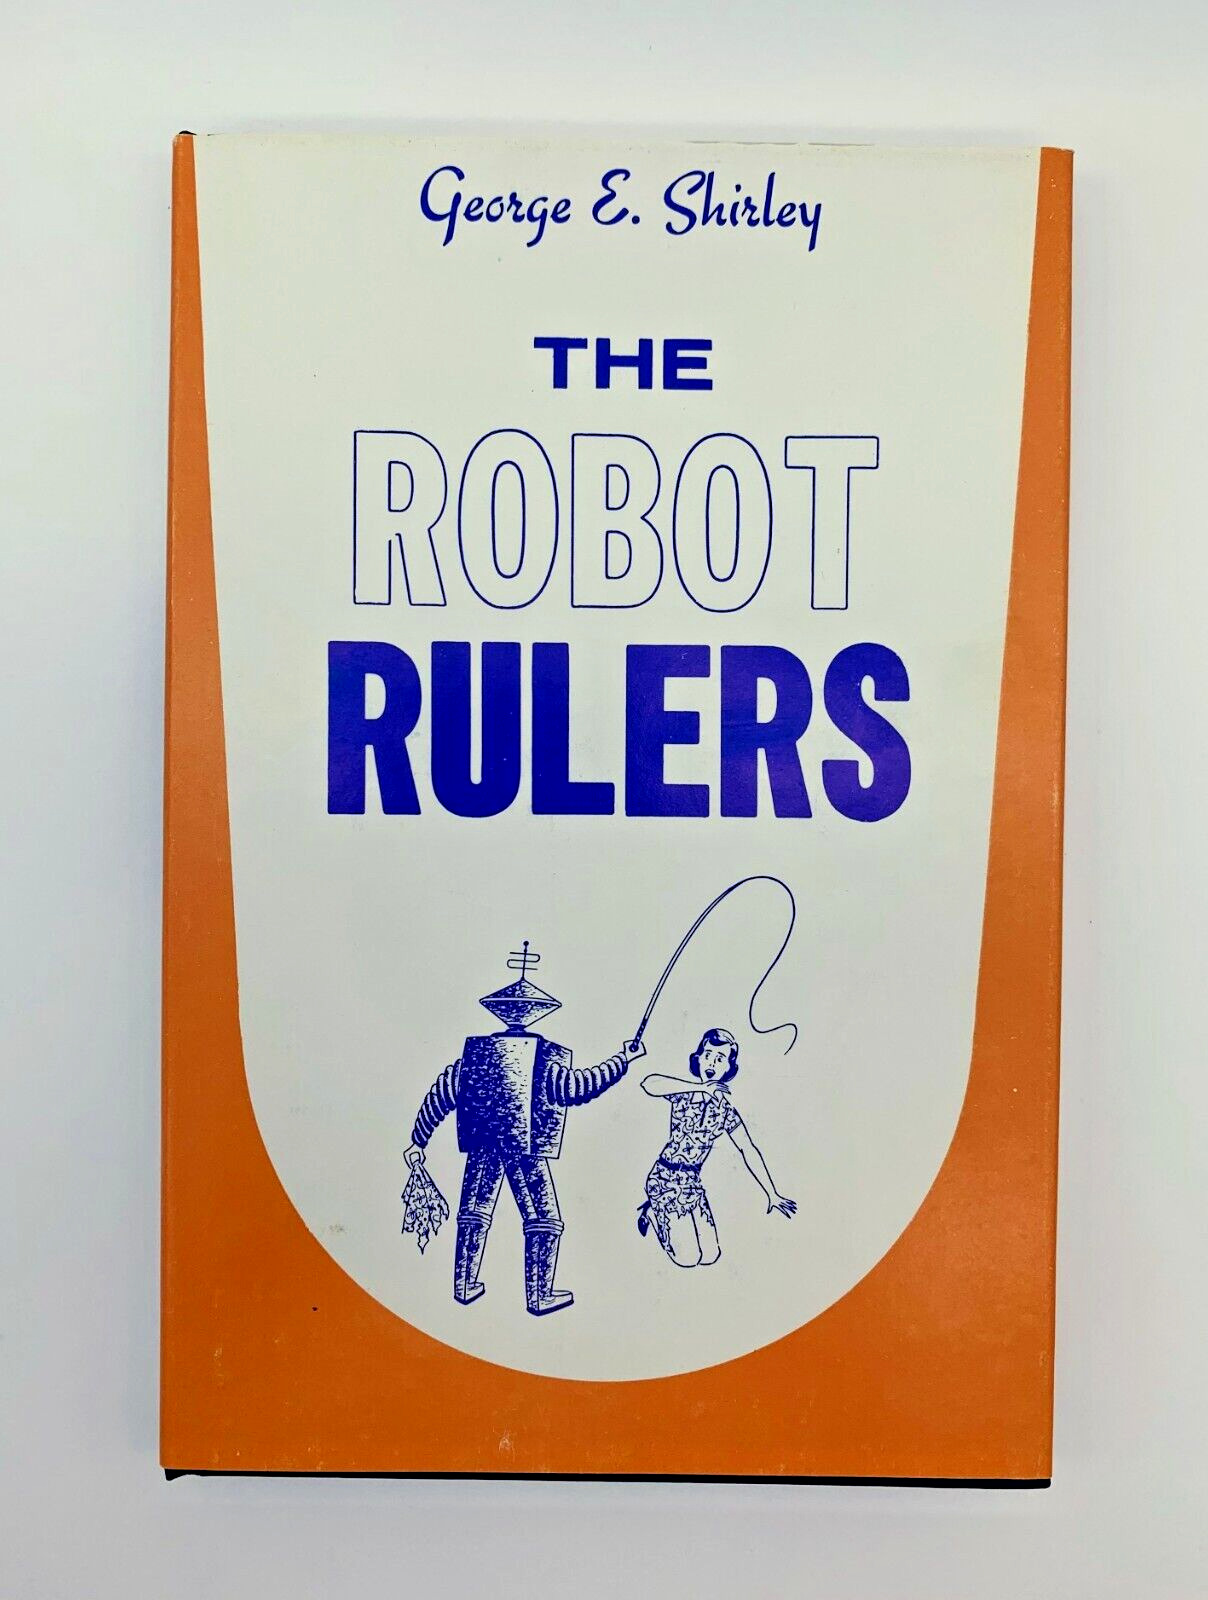 Vintage 1967 Hardcover Book The Robot Rulers George E. Shirley Science Fiction